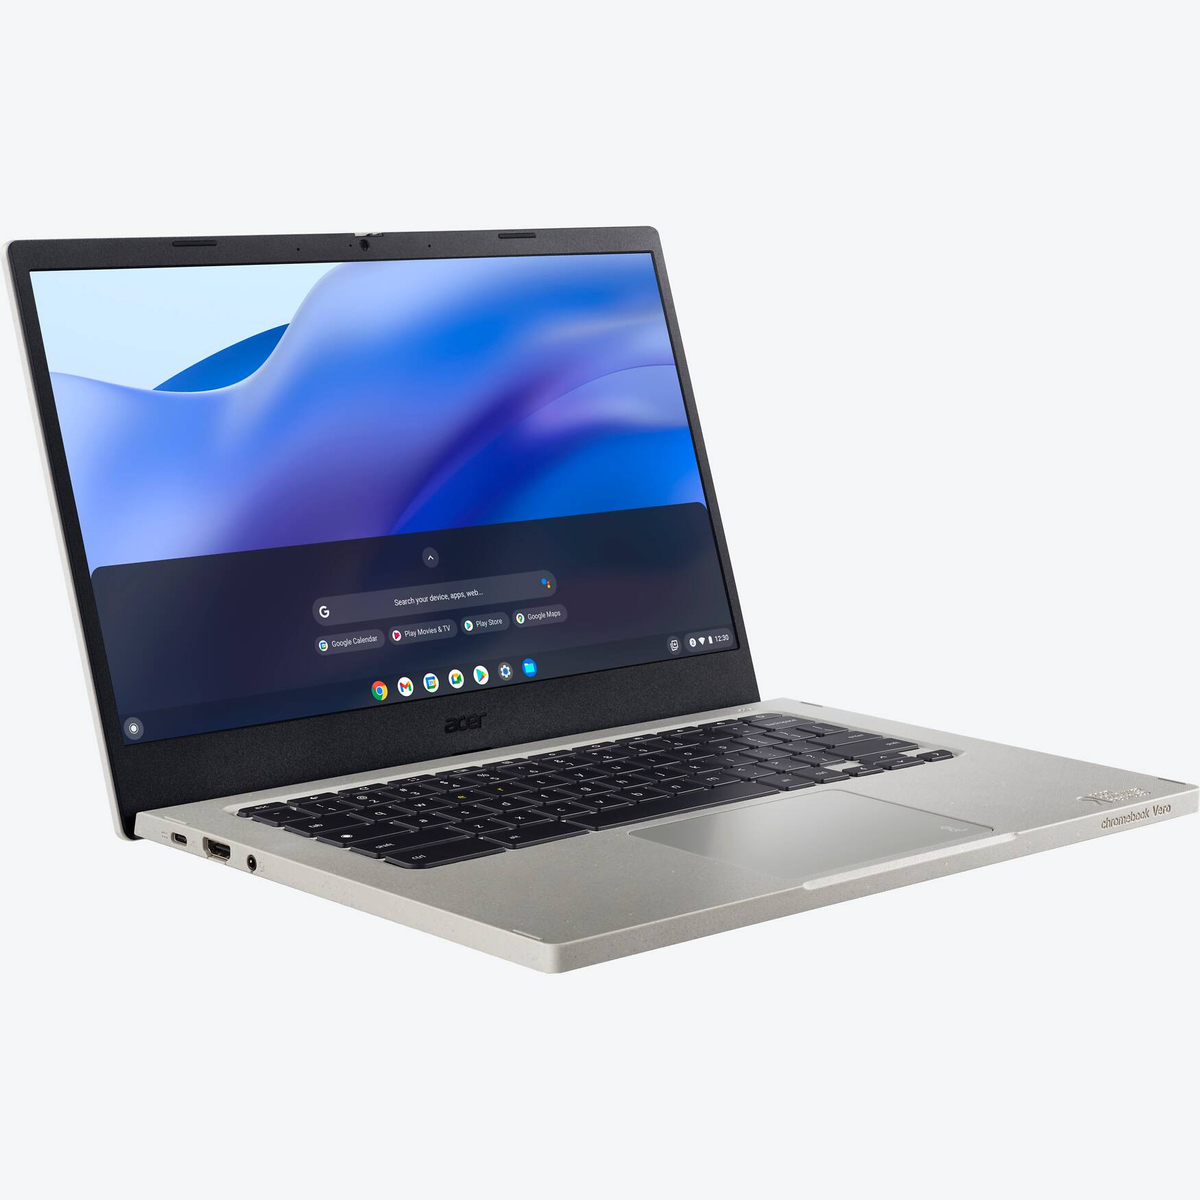 SSD, 8 RAM, Notebook 256 GB 14 ACER Prozessor, Clamshell Core™ Intel® Zoll mit Display, GB i5 Chromebo514,